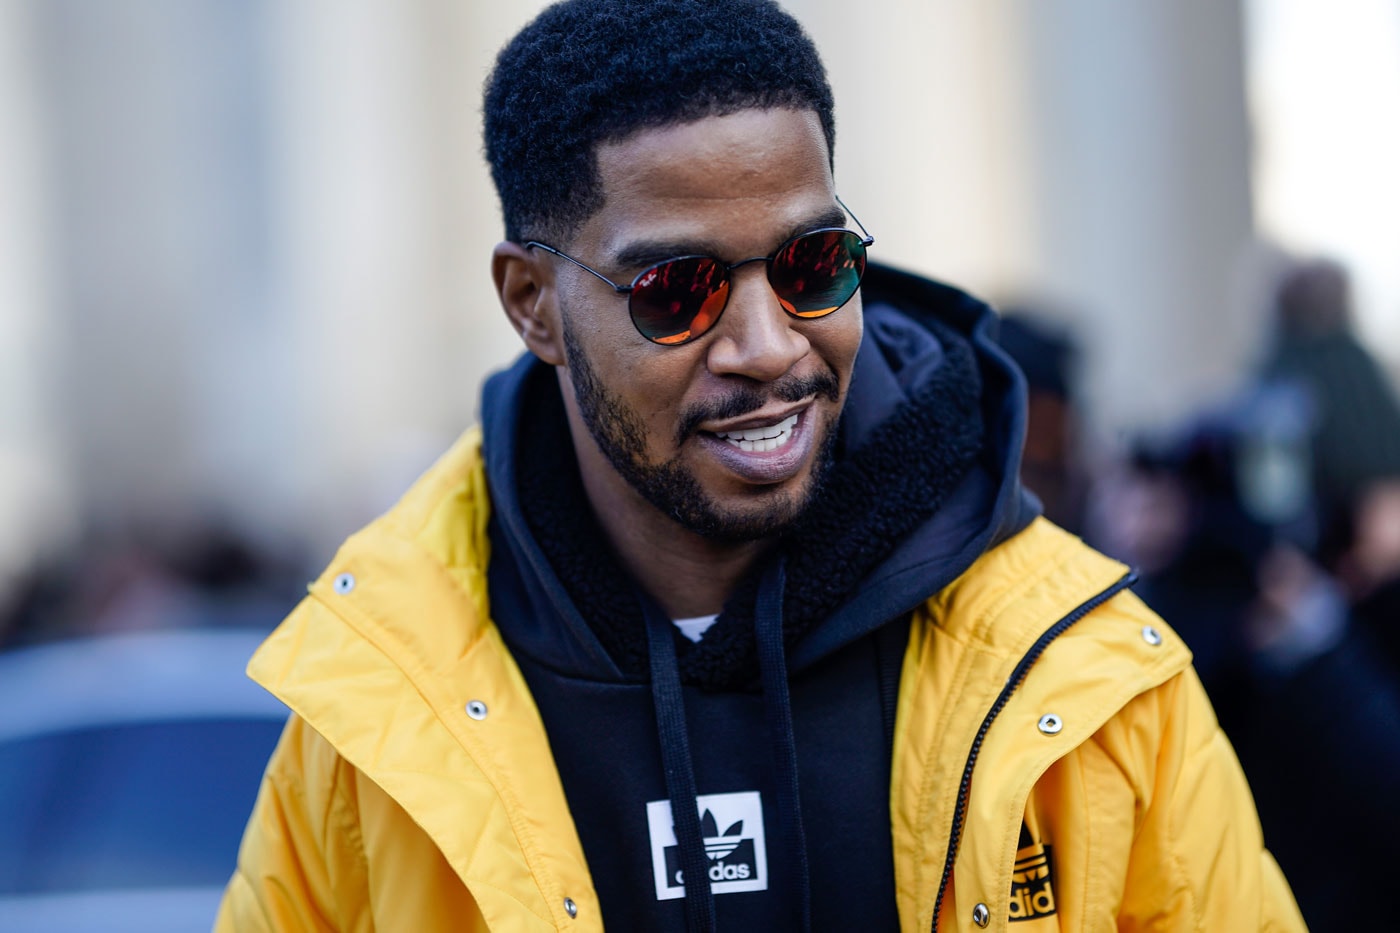 Kid Cudi Pens Emotional Letter to Fans About His Depression and Suicide Urges